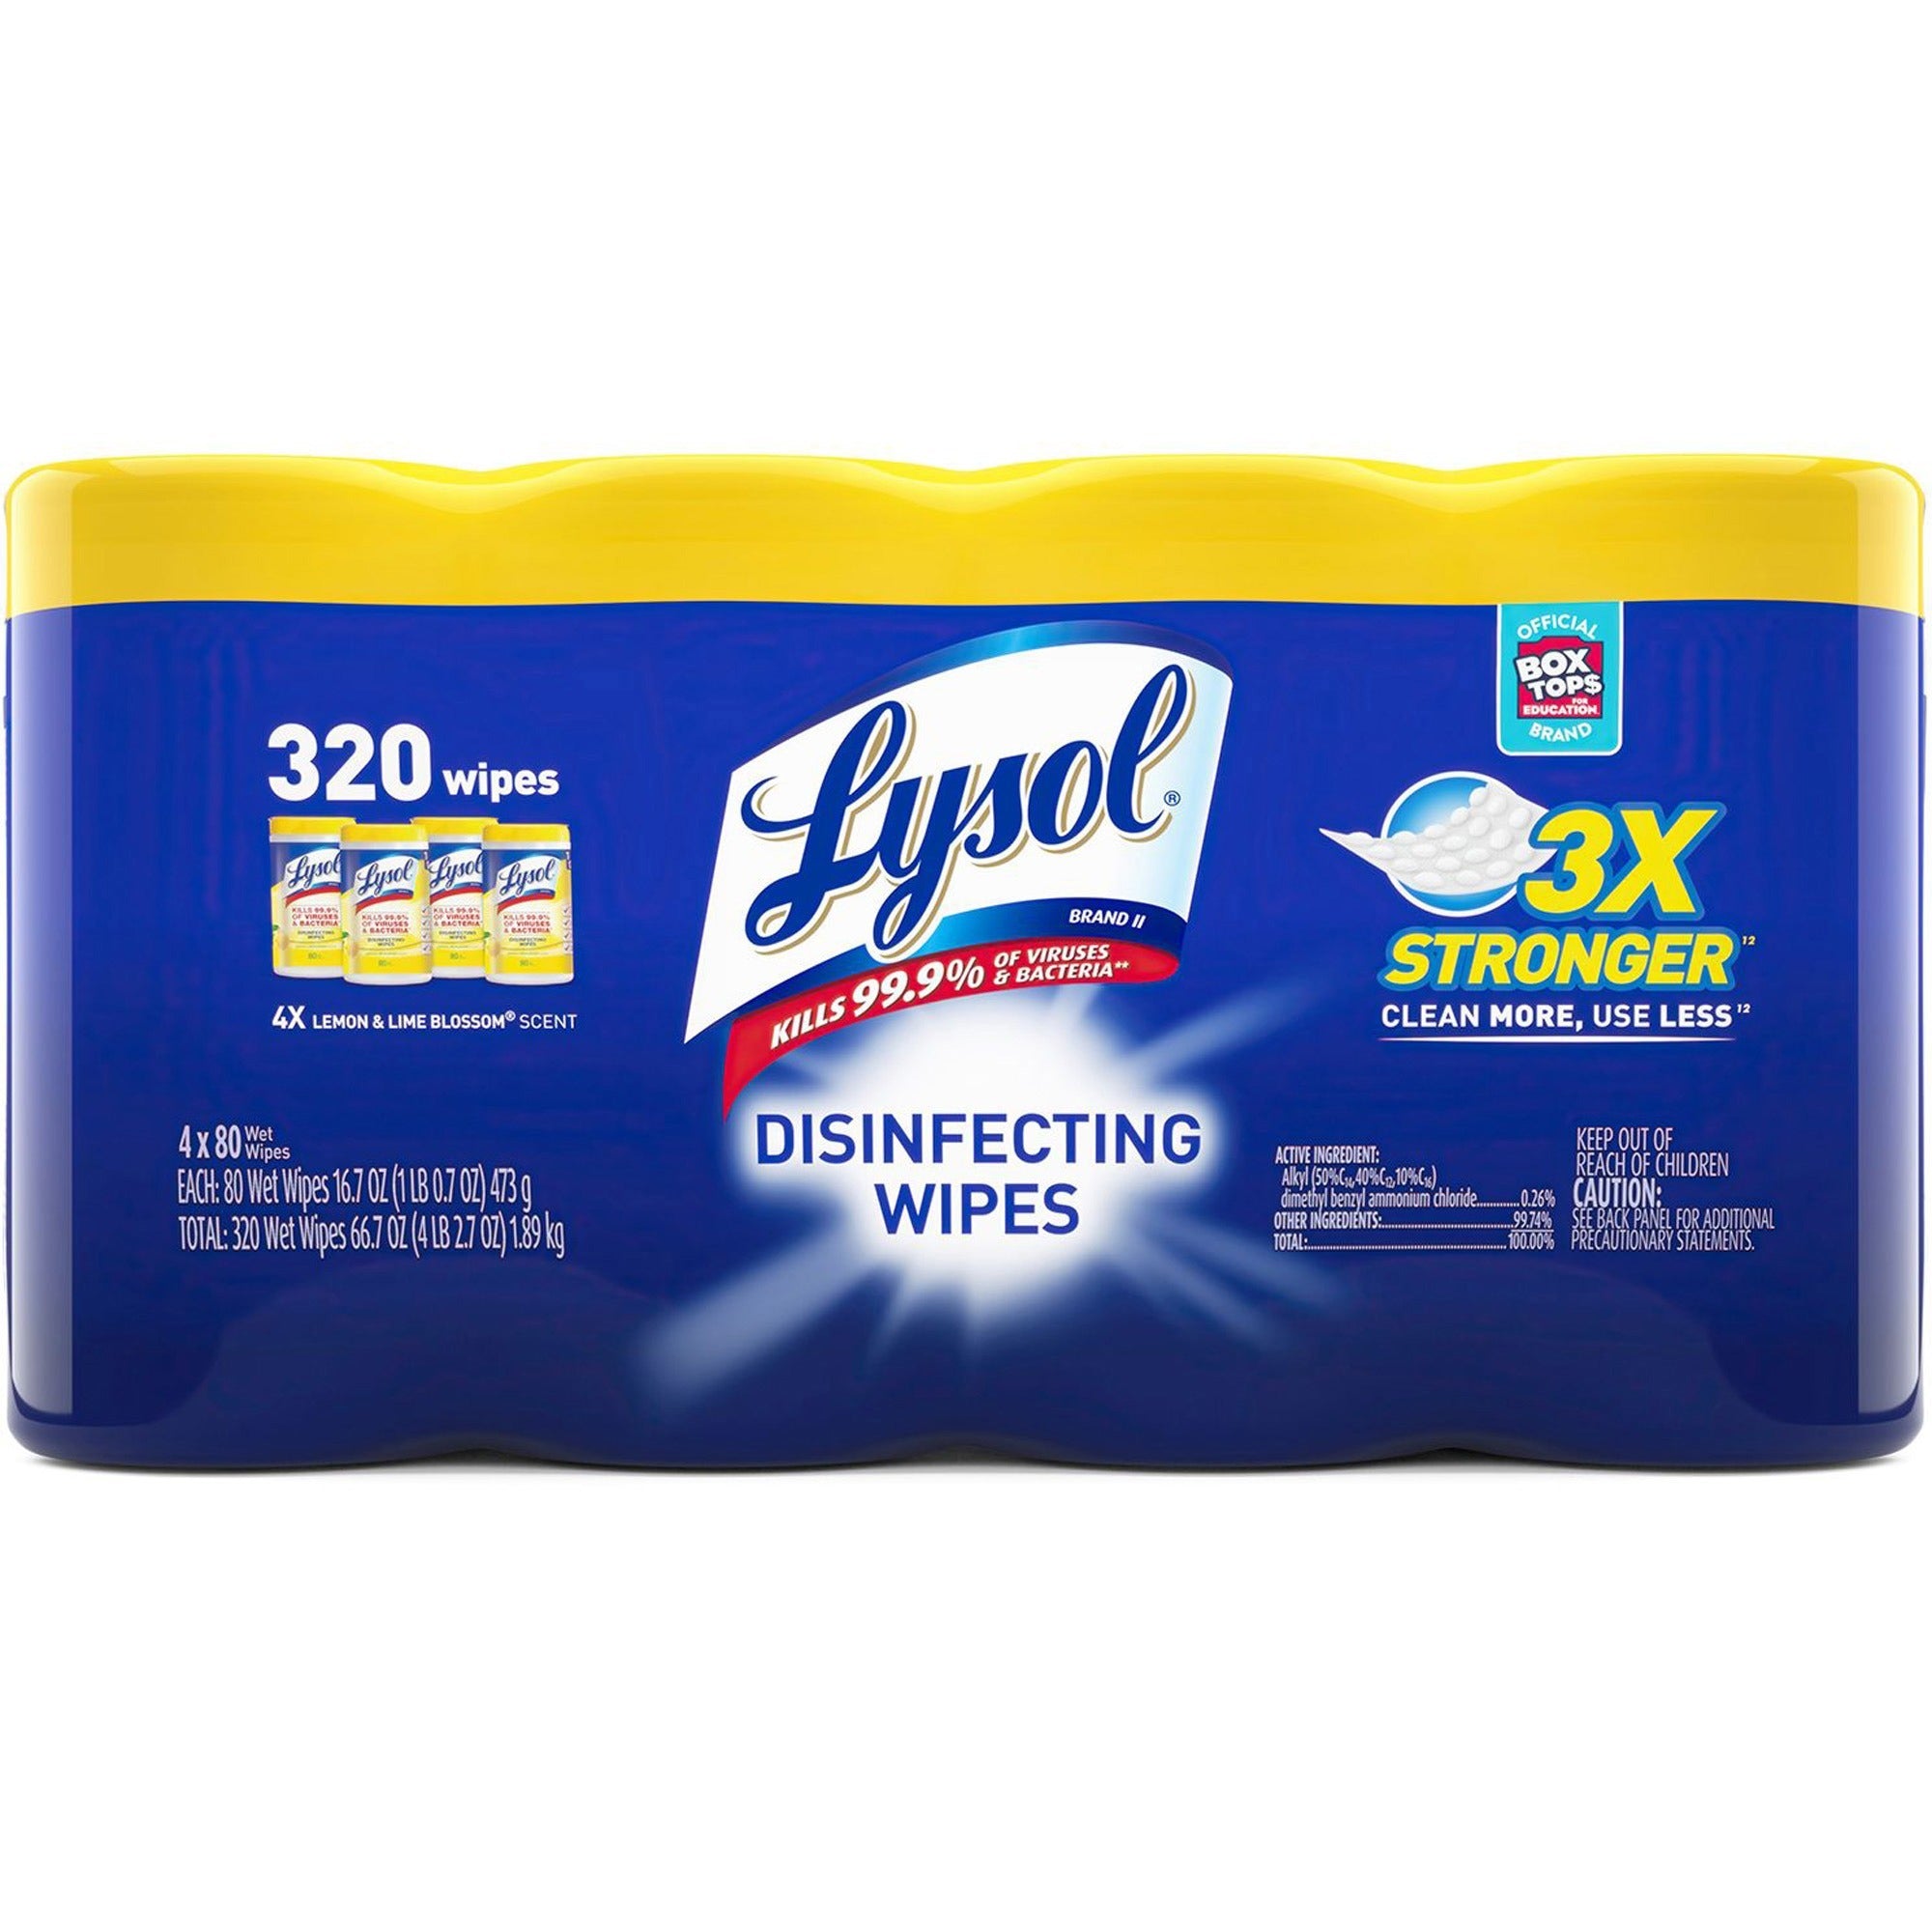 lysol-4-pack-disinfecting-wipes-lemon-lime-scent-800-canister-4-pack-pre-moistened-antibacterial-disinfectant-white_rac90641 - 1